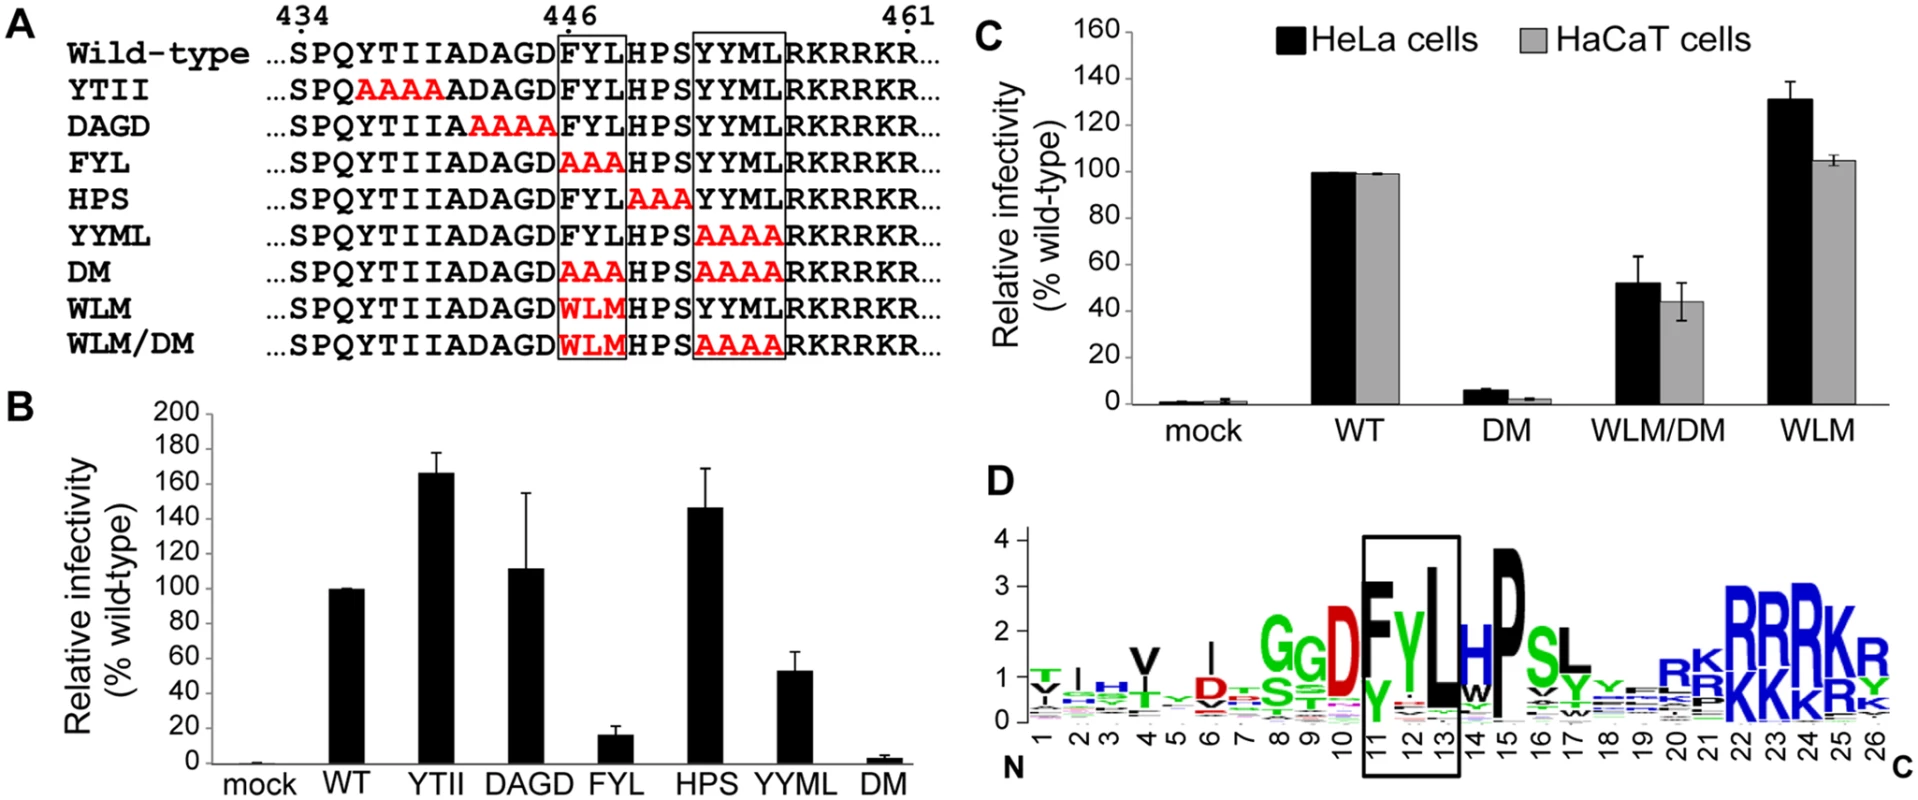 The carboxy-terminus of HPV16 L2 contains two potential retromer recognition motifs required for infectivity.